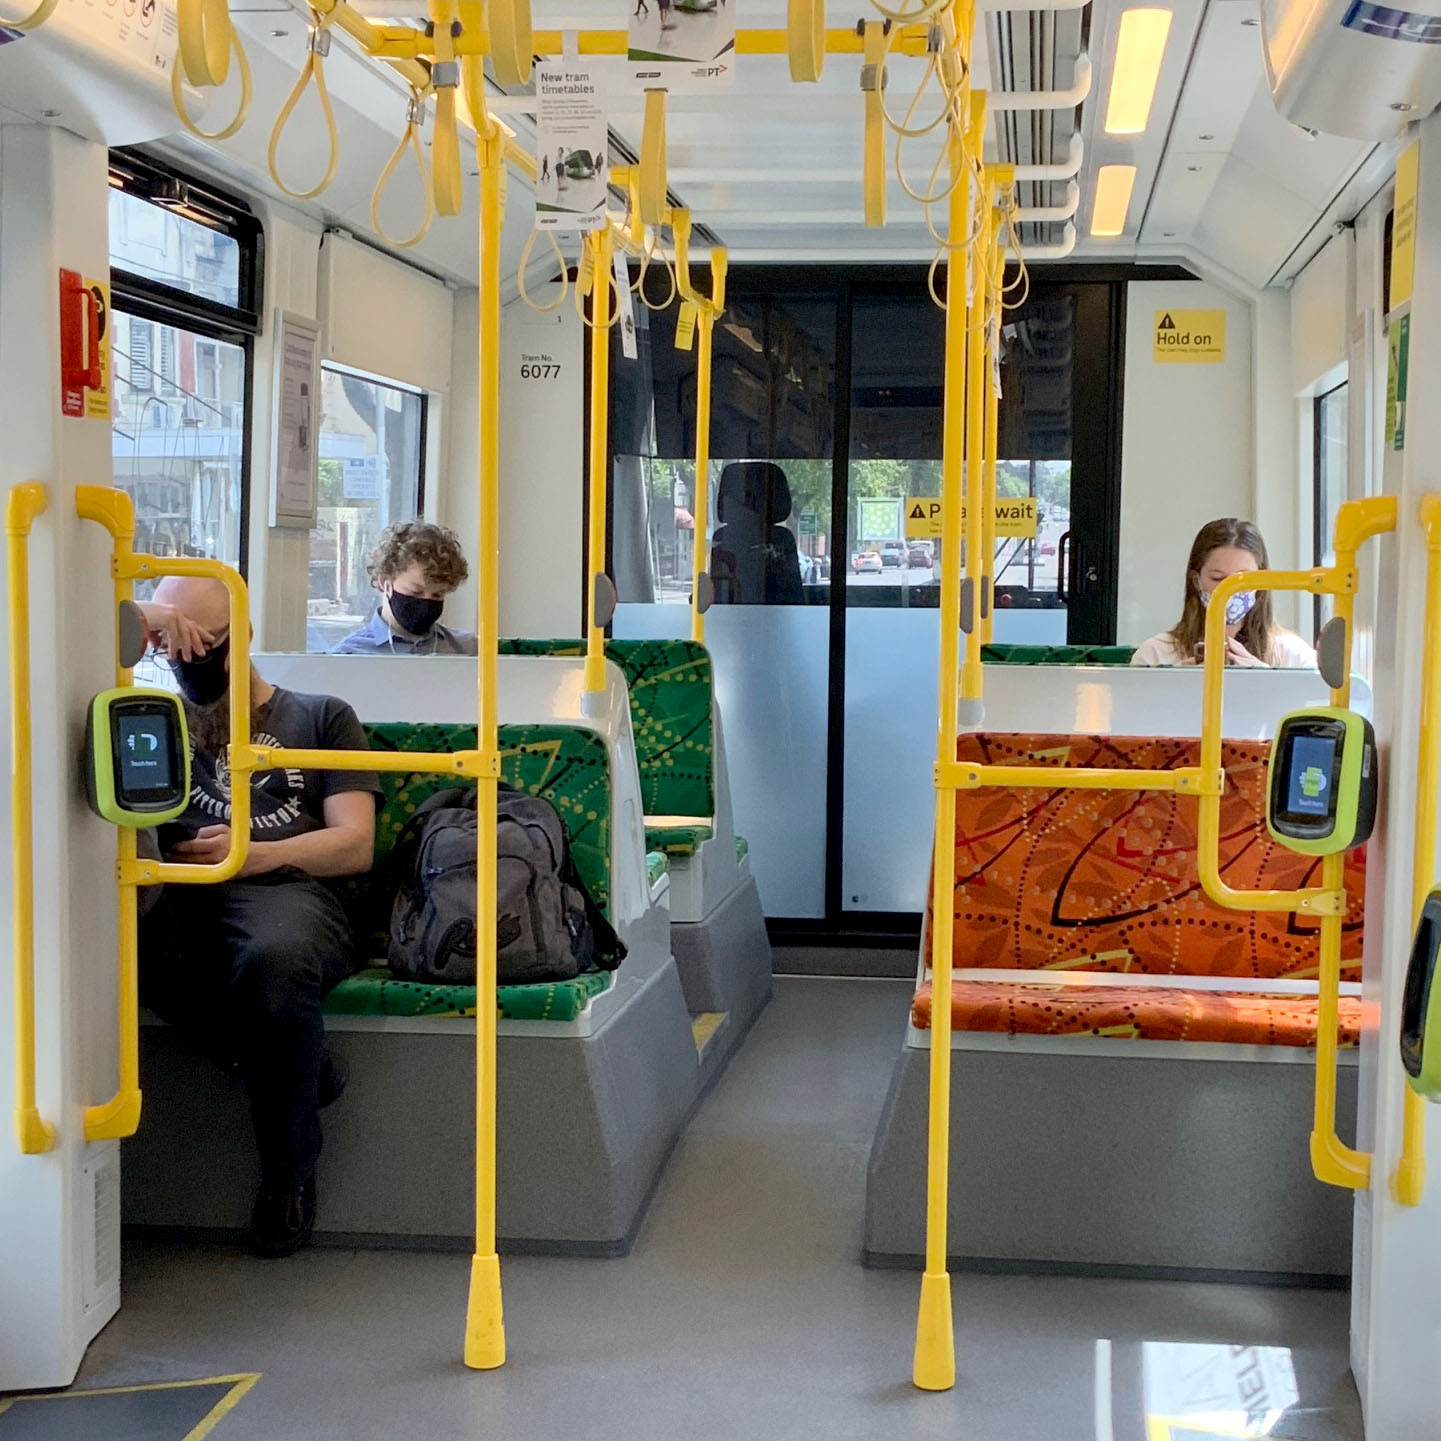 Image shows three people wearing face masks and employing social distancing while travelling on a tram.